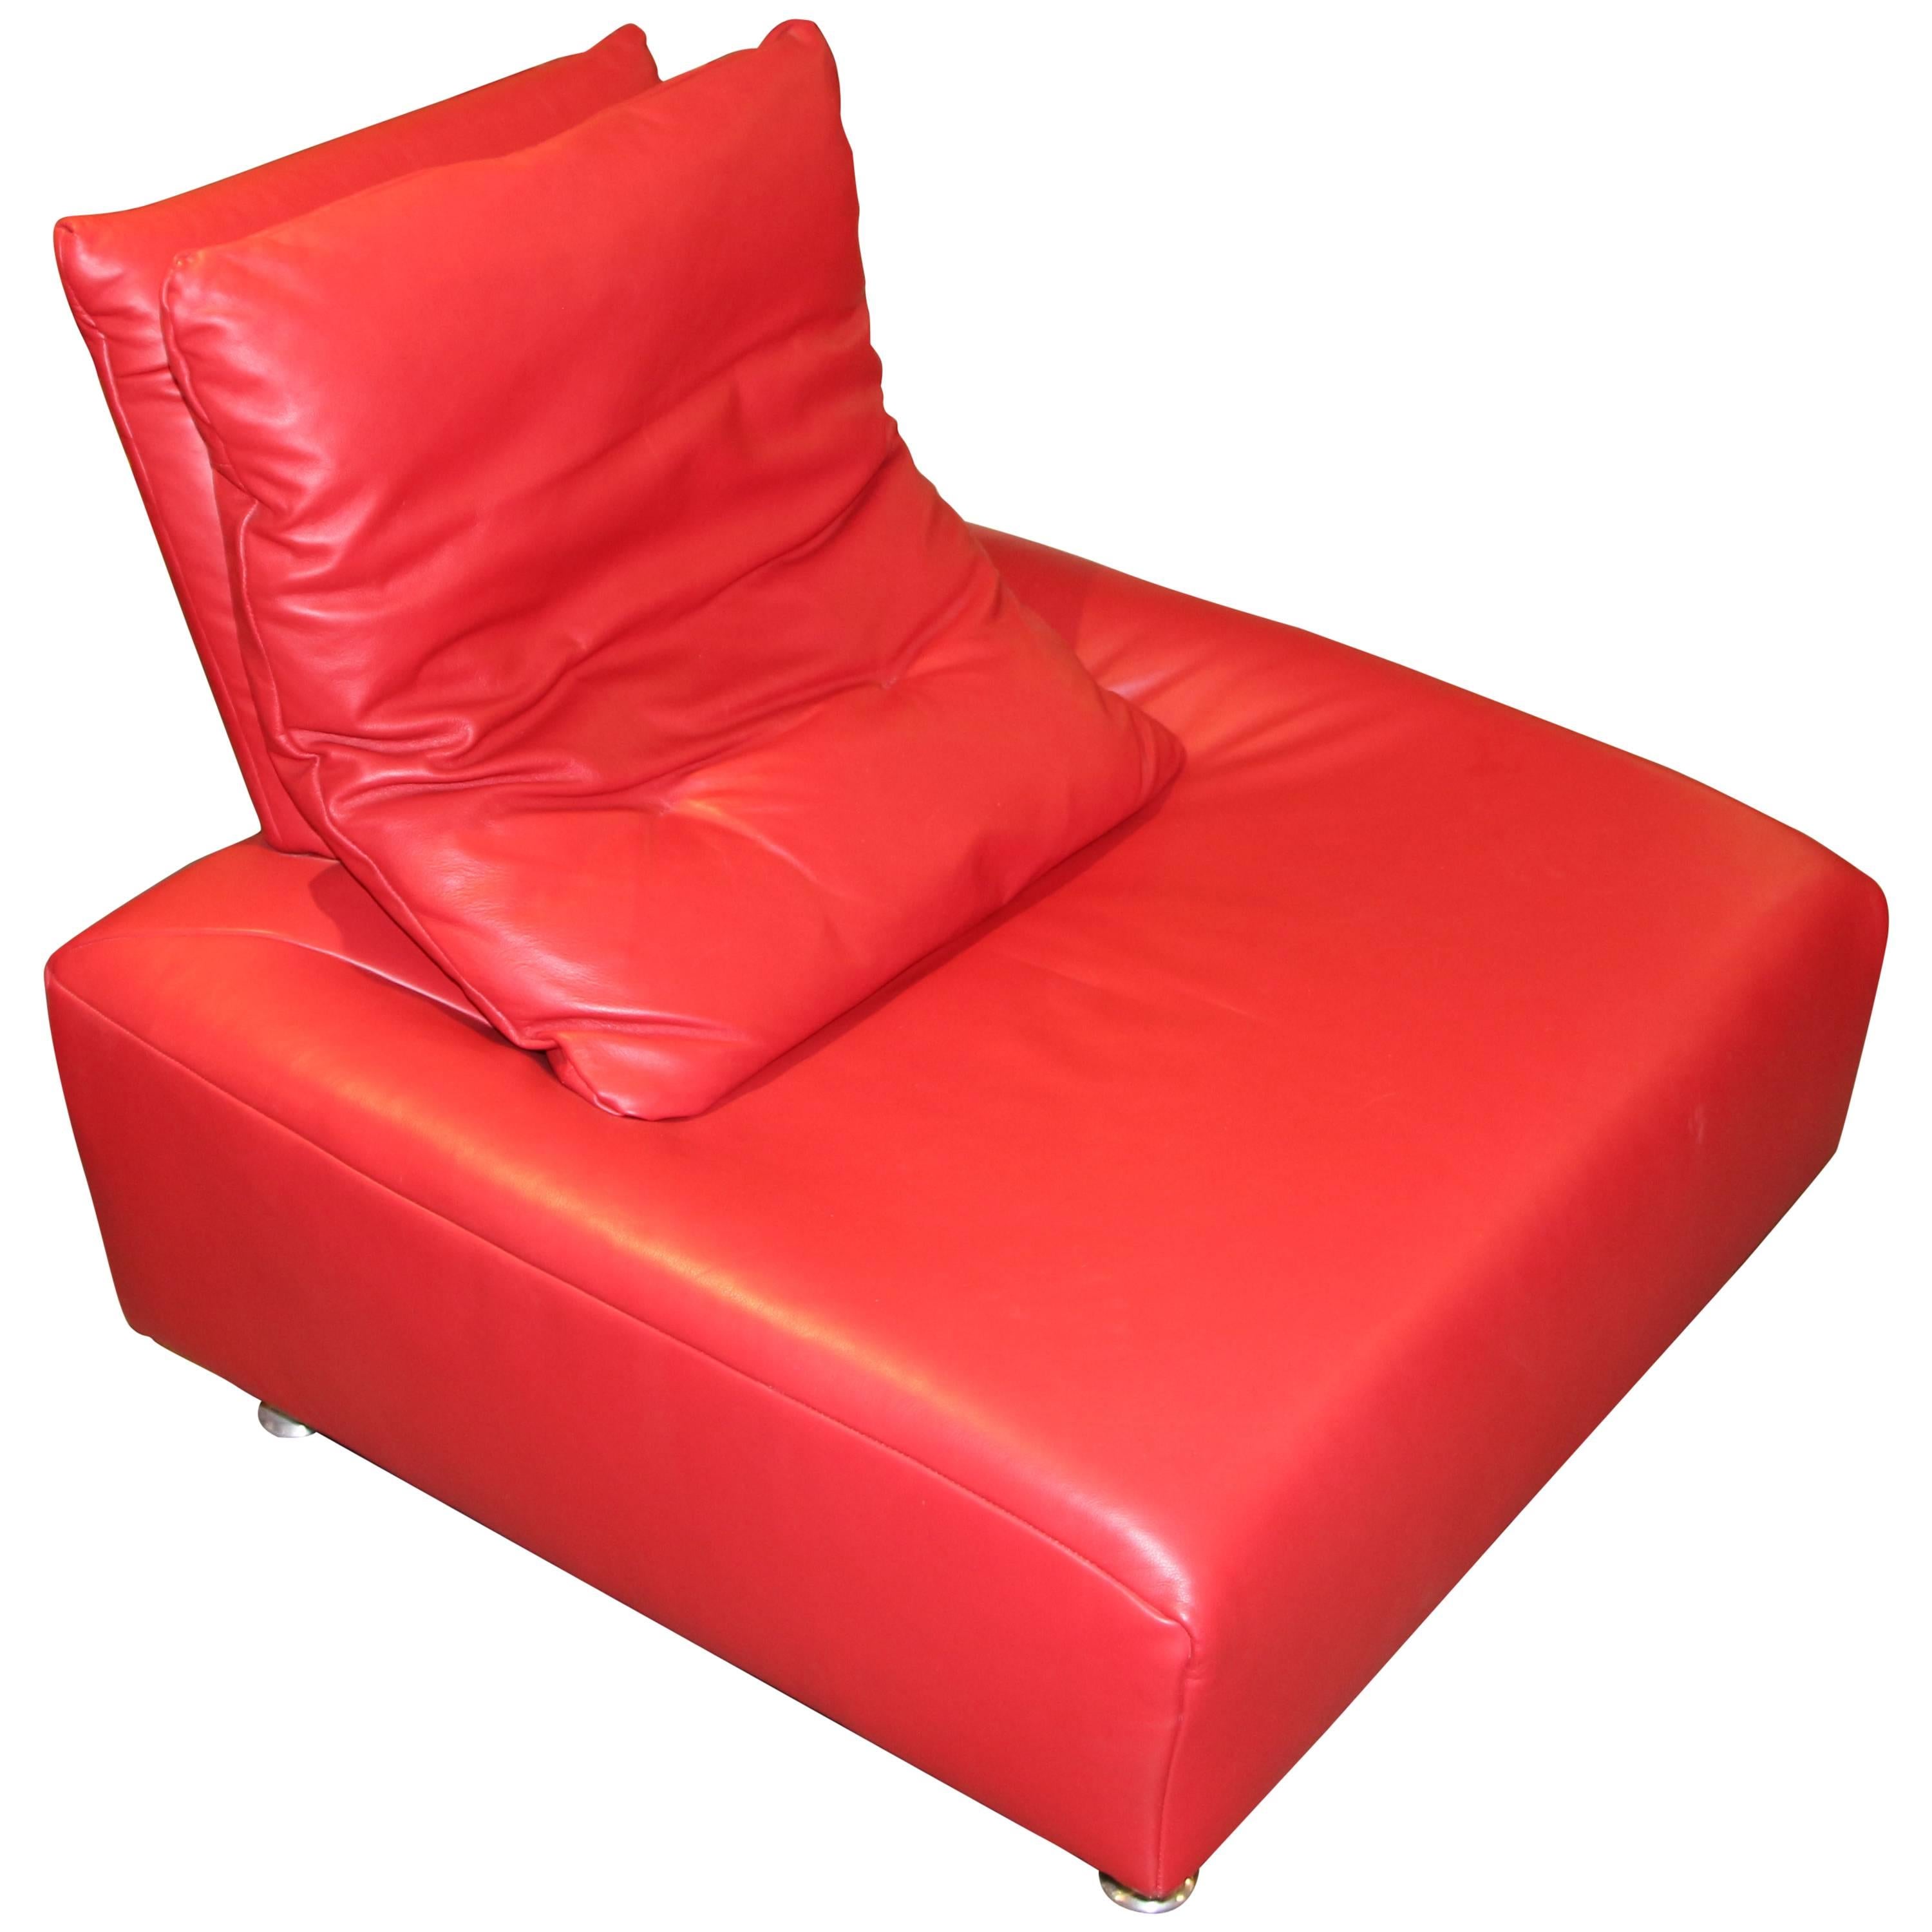 Fabulous Soft Red Leather Italian Lounge Chair That Floats and Wiggles